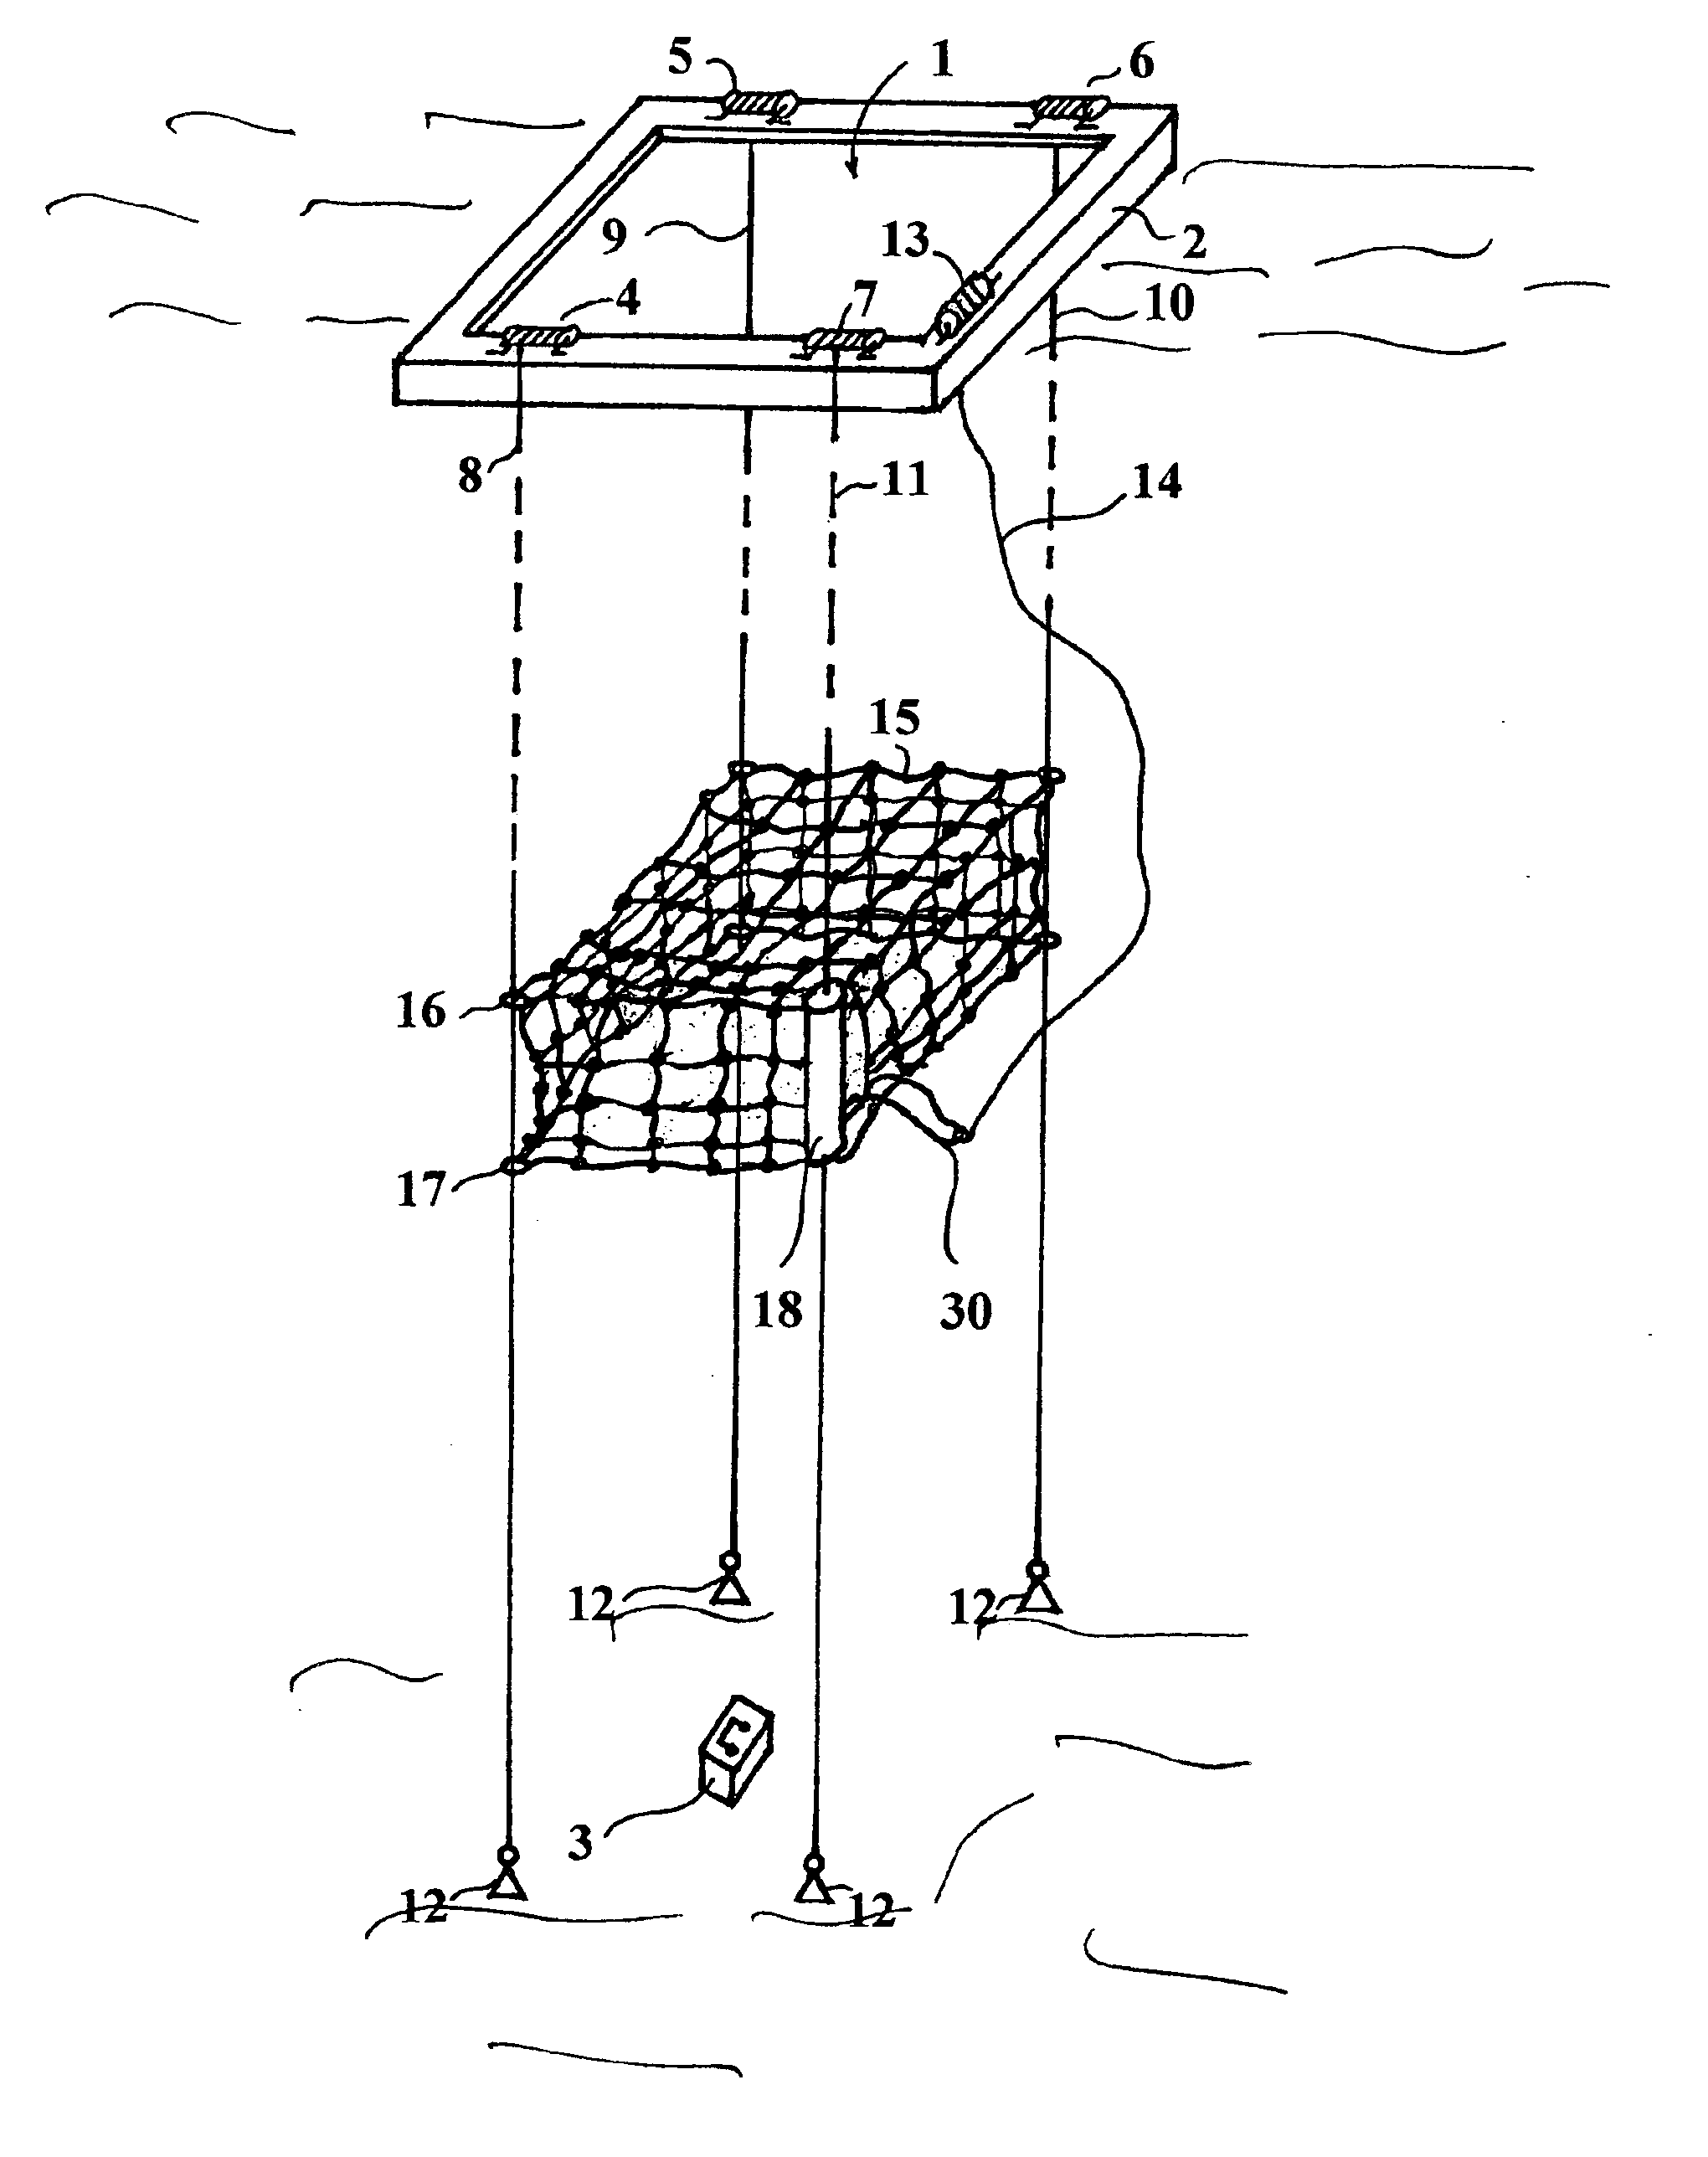 Device and method for raising sunken objects